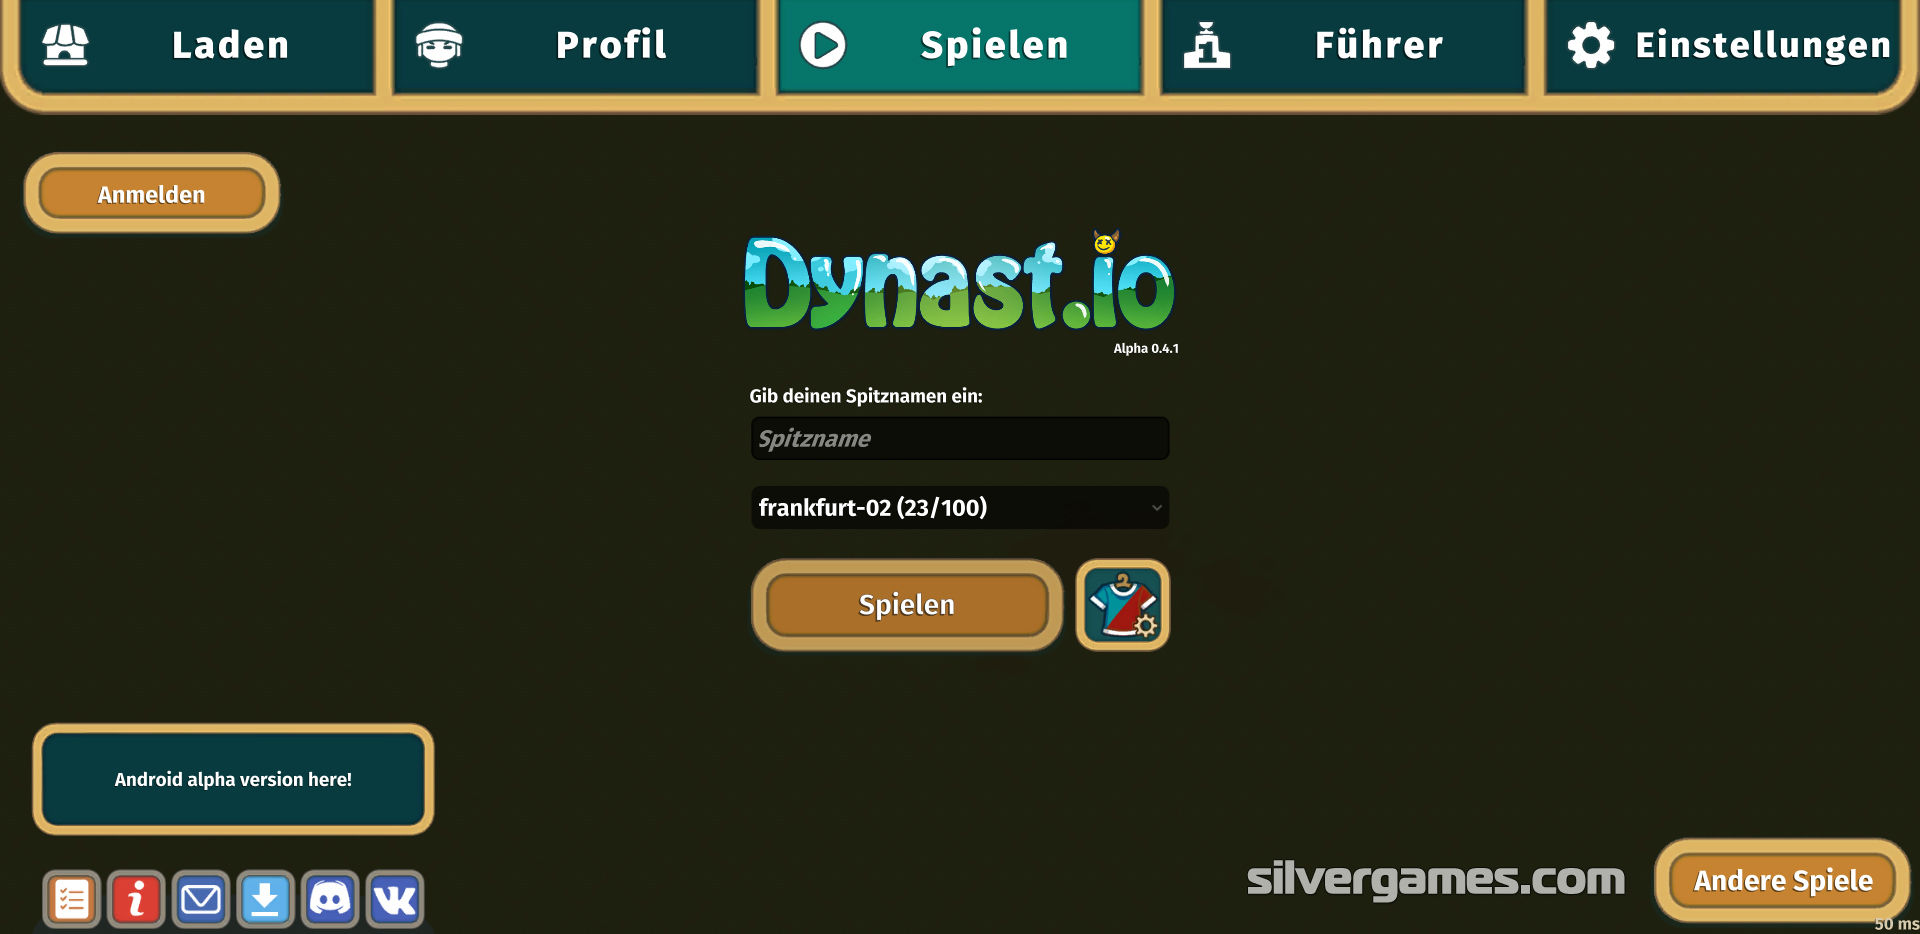 Dynast io — Play for free at